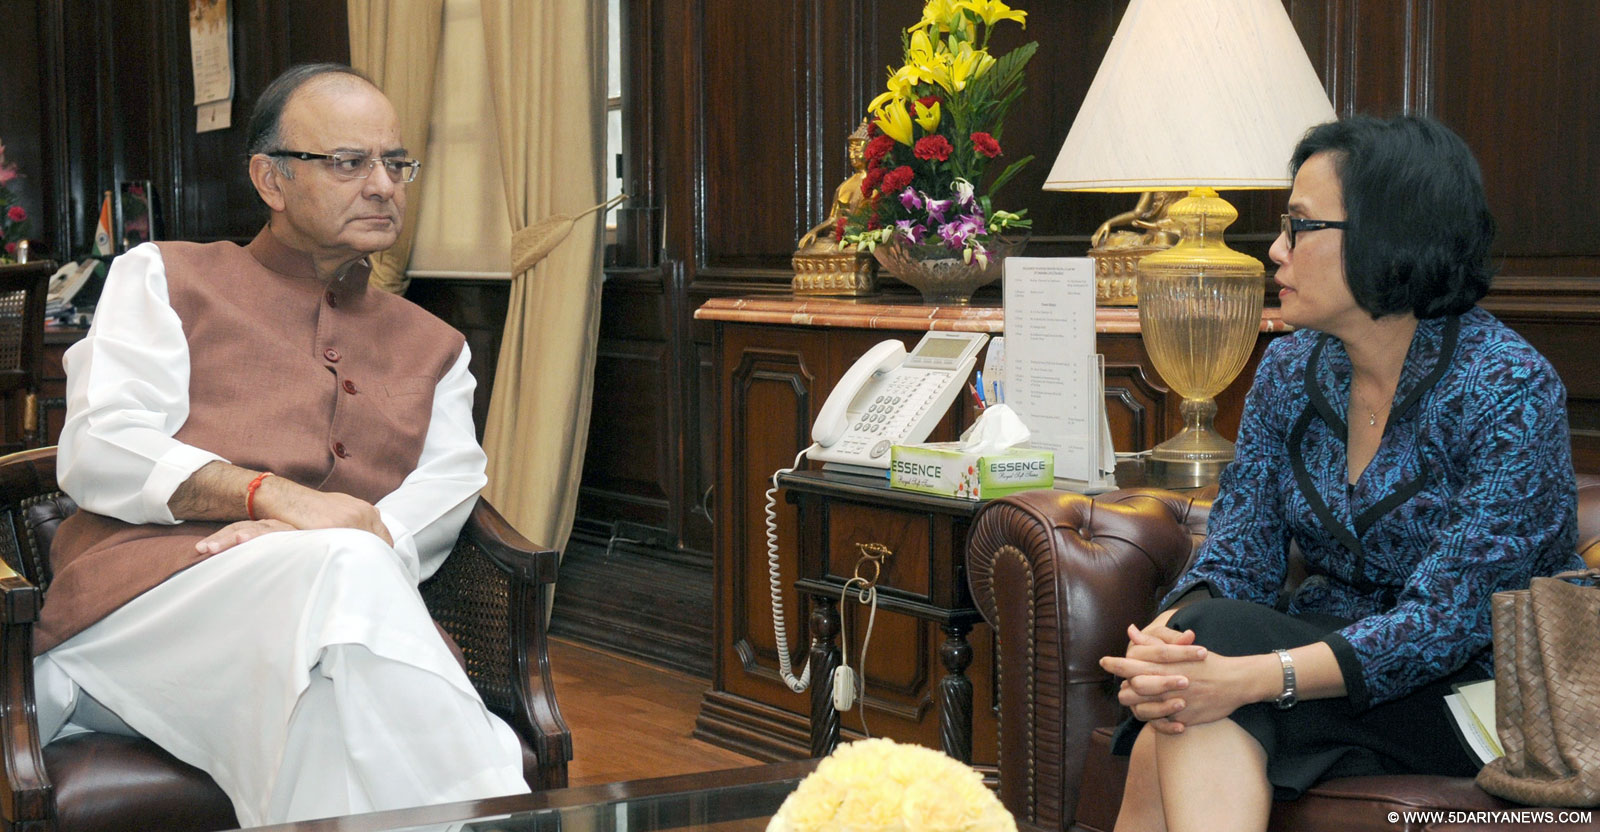 New Delhi: New Delhi: World Bank MD Sri Mulyani Indrawati calls on the Union Minister for Finance, Corporate Affairs and Information and Broadcasting, Arun Jaitley, in New Delhi on Sep 24, 2015. 